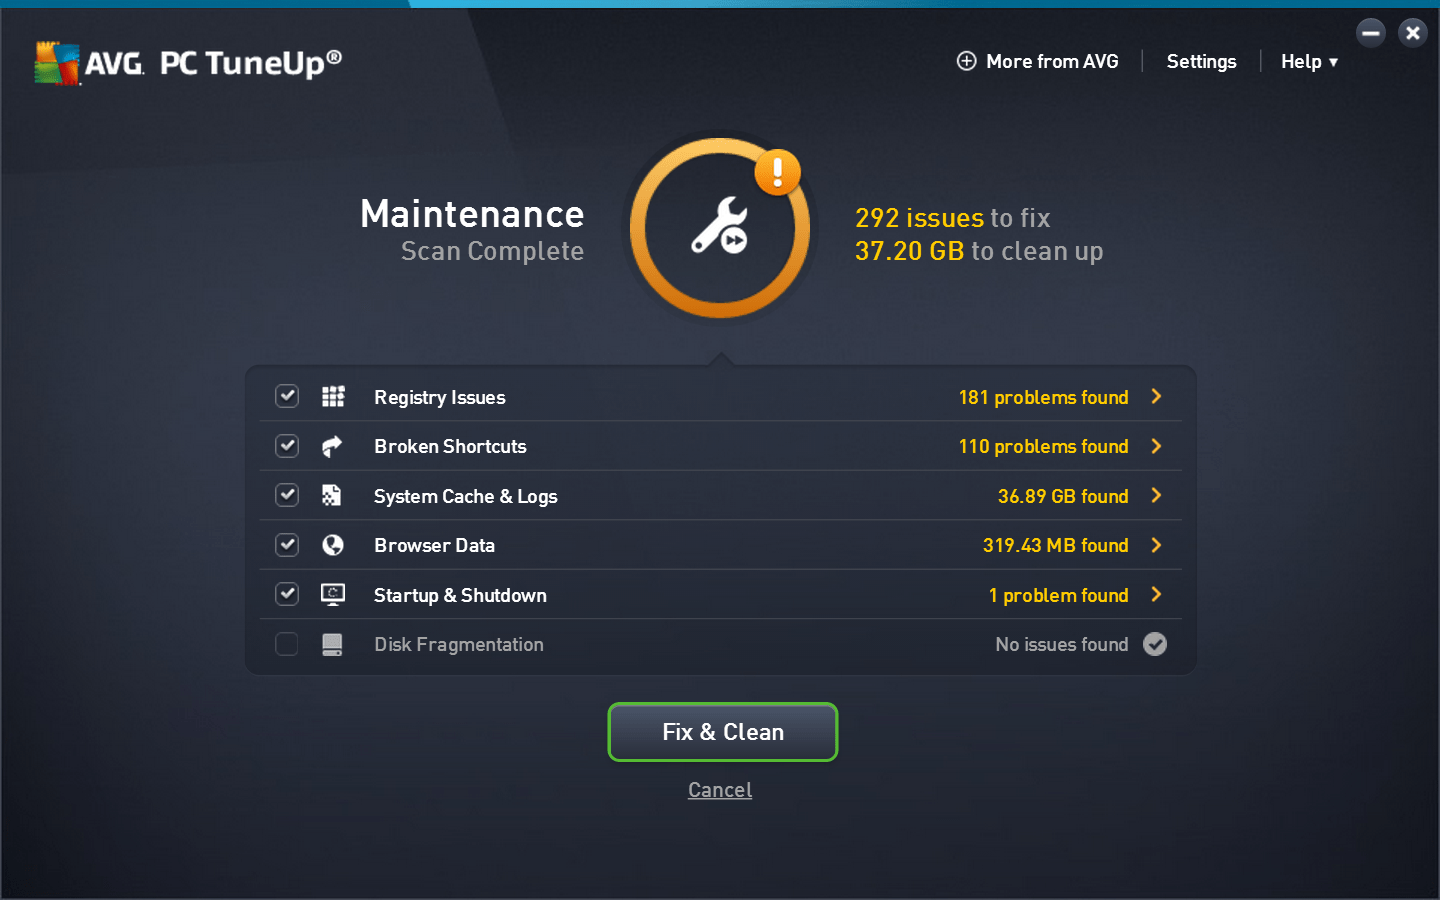 avg cleaner for mac review